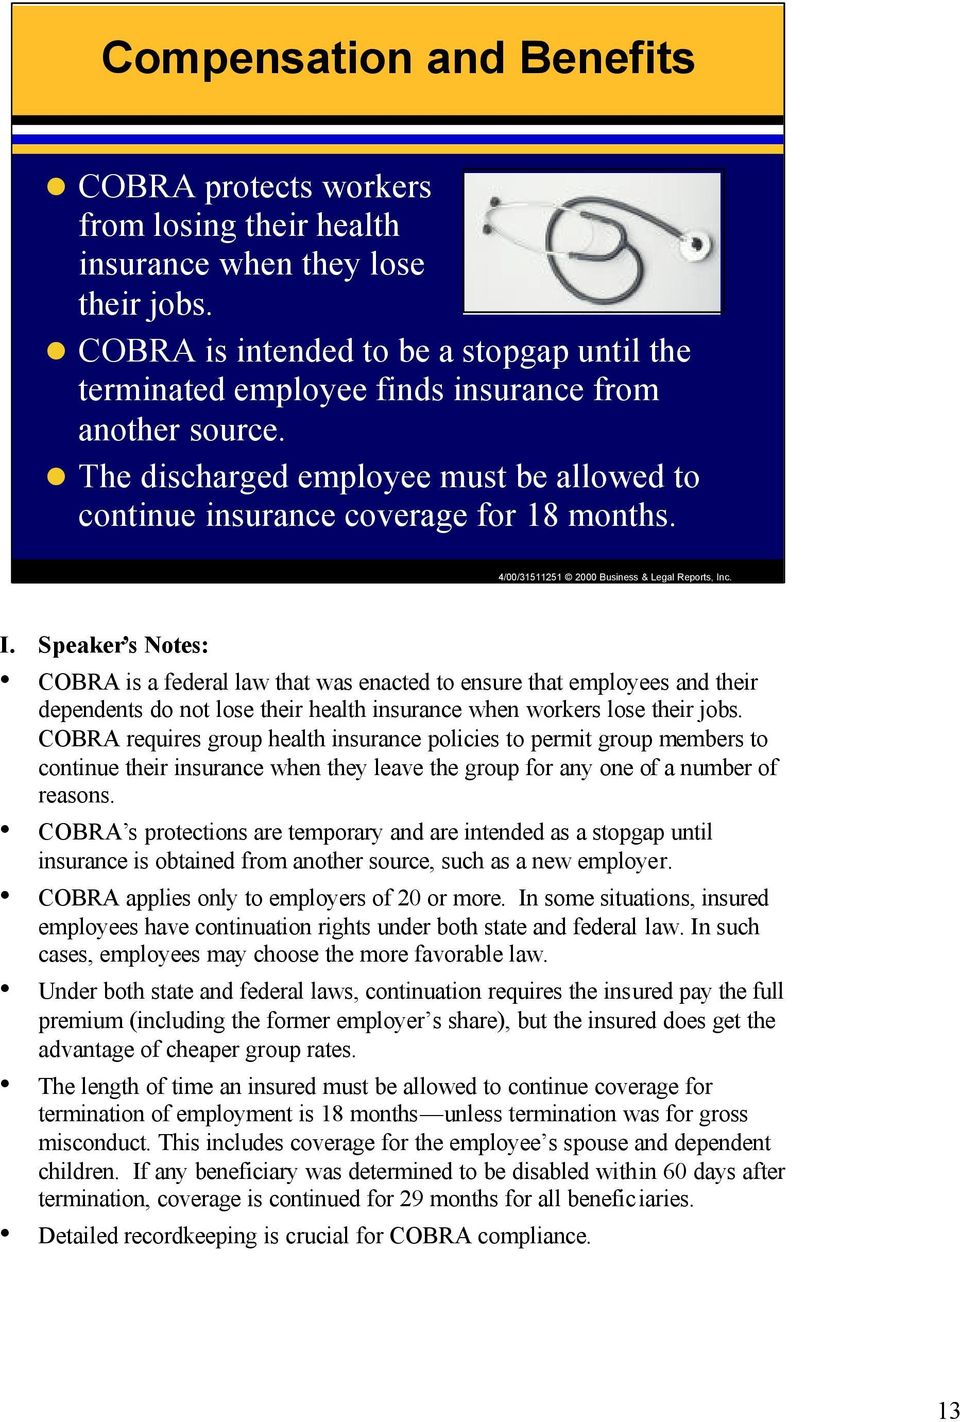 COBRA is a federal law that was enacted to ensure that employees and their dependents do not lose their health insurance when workers lose their jobs.